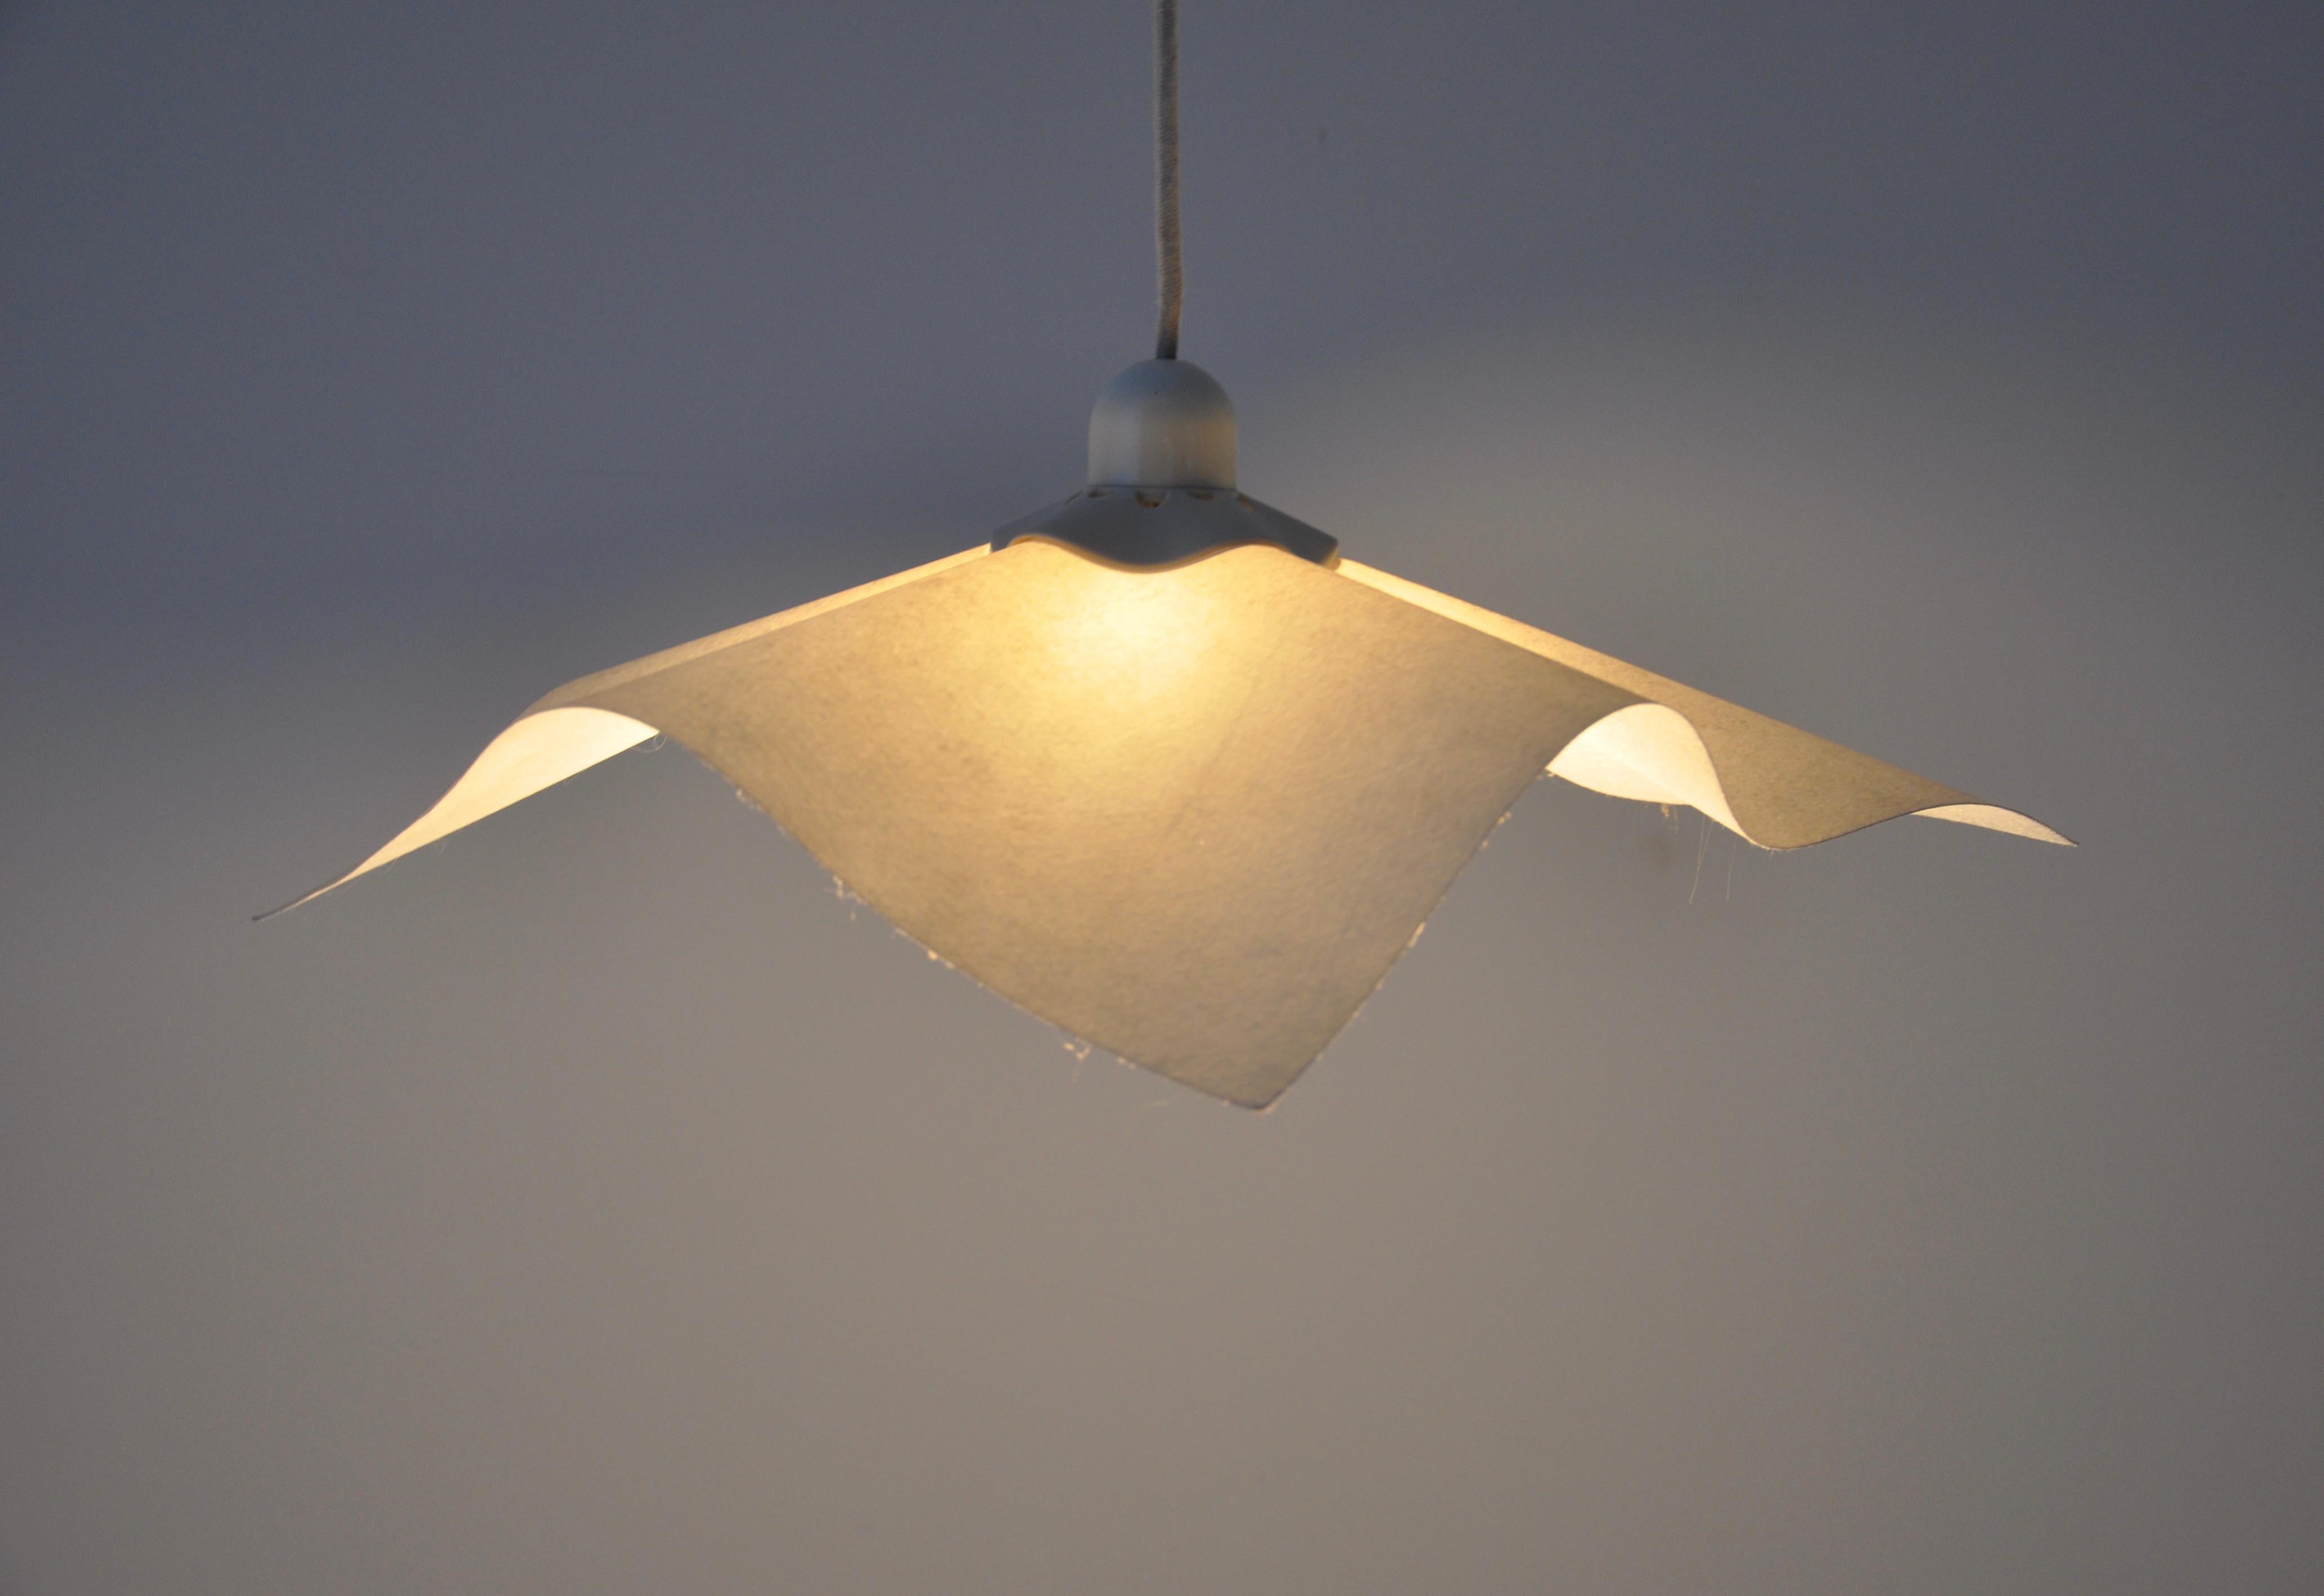 Paper and plastic hanging lamp by Mario Bellini, model: Area 50. Maximum height with cable: 124 cm. Wear due to time and age